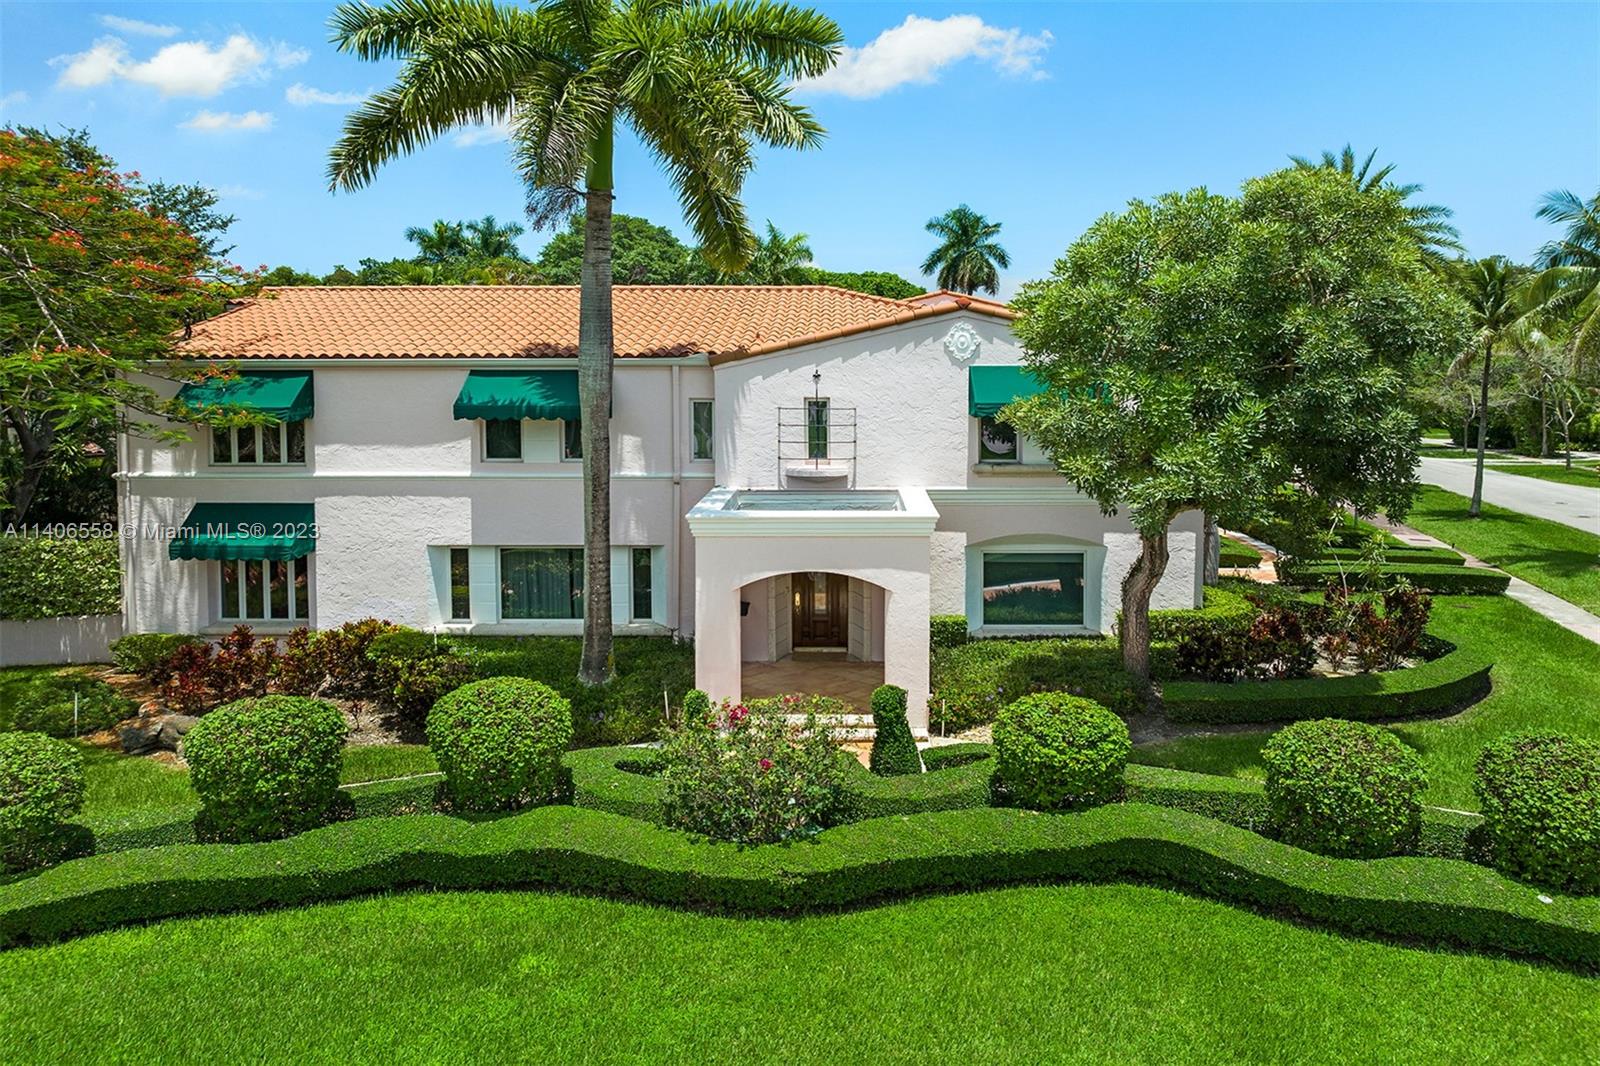 Property for Sale at 2525 Indian Mound Trl Trl, Coral Gables, Broward County, Florida - Bedrooms: 7 
Bathrooms: 9.5  - $5,000,000